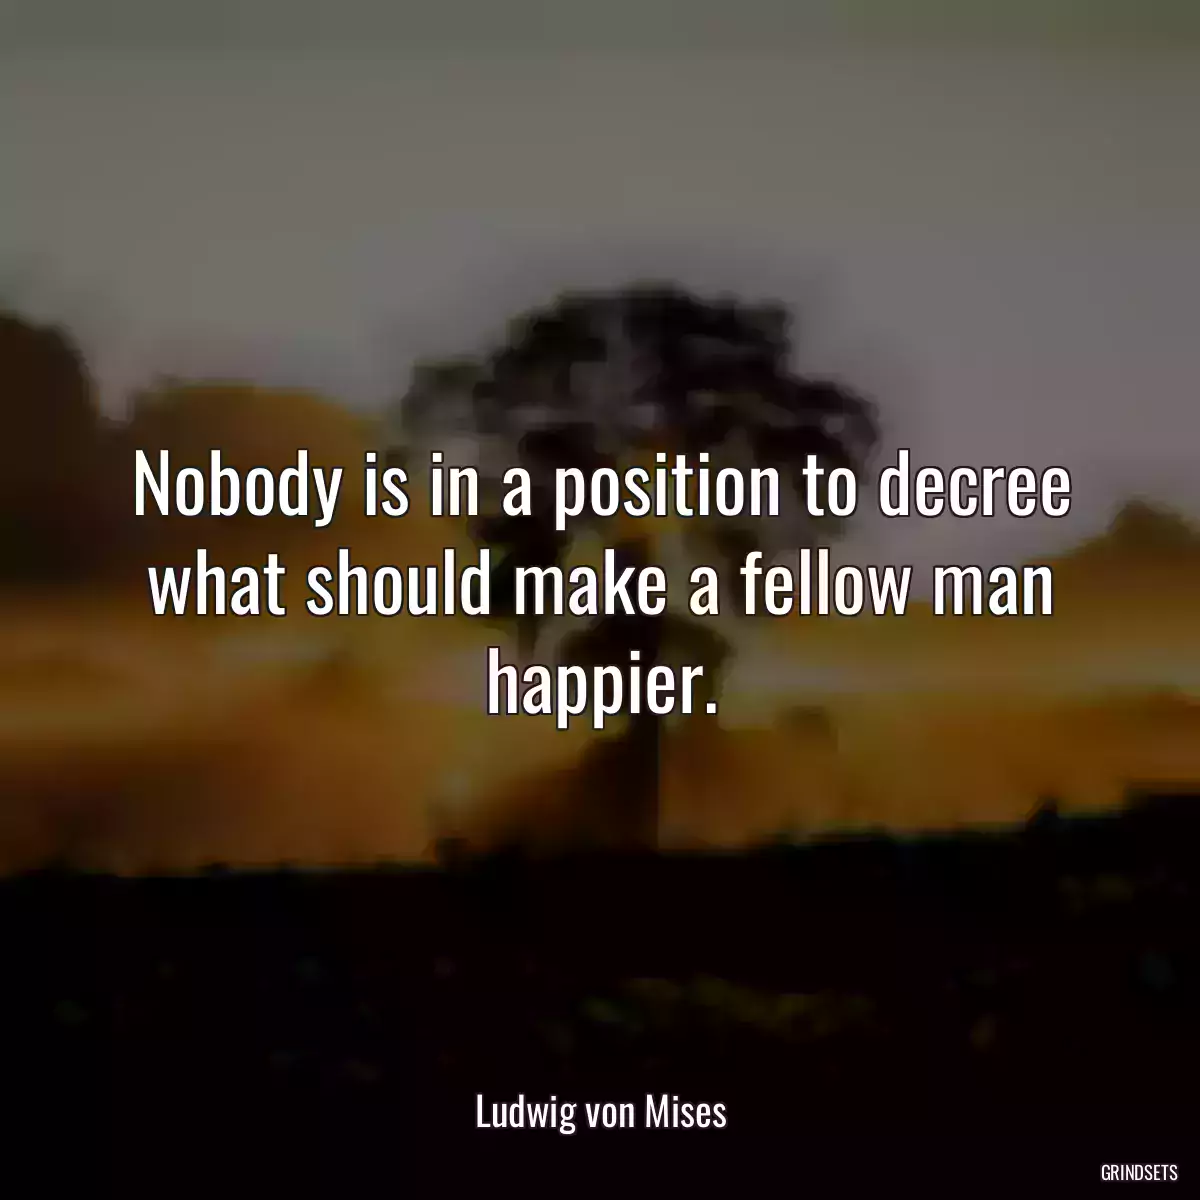 Nobody is in a position to decree what should make a fellow man happier.